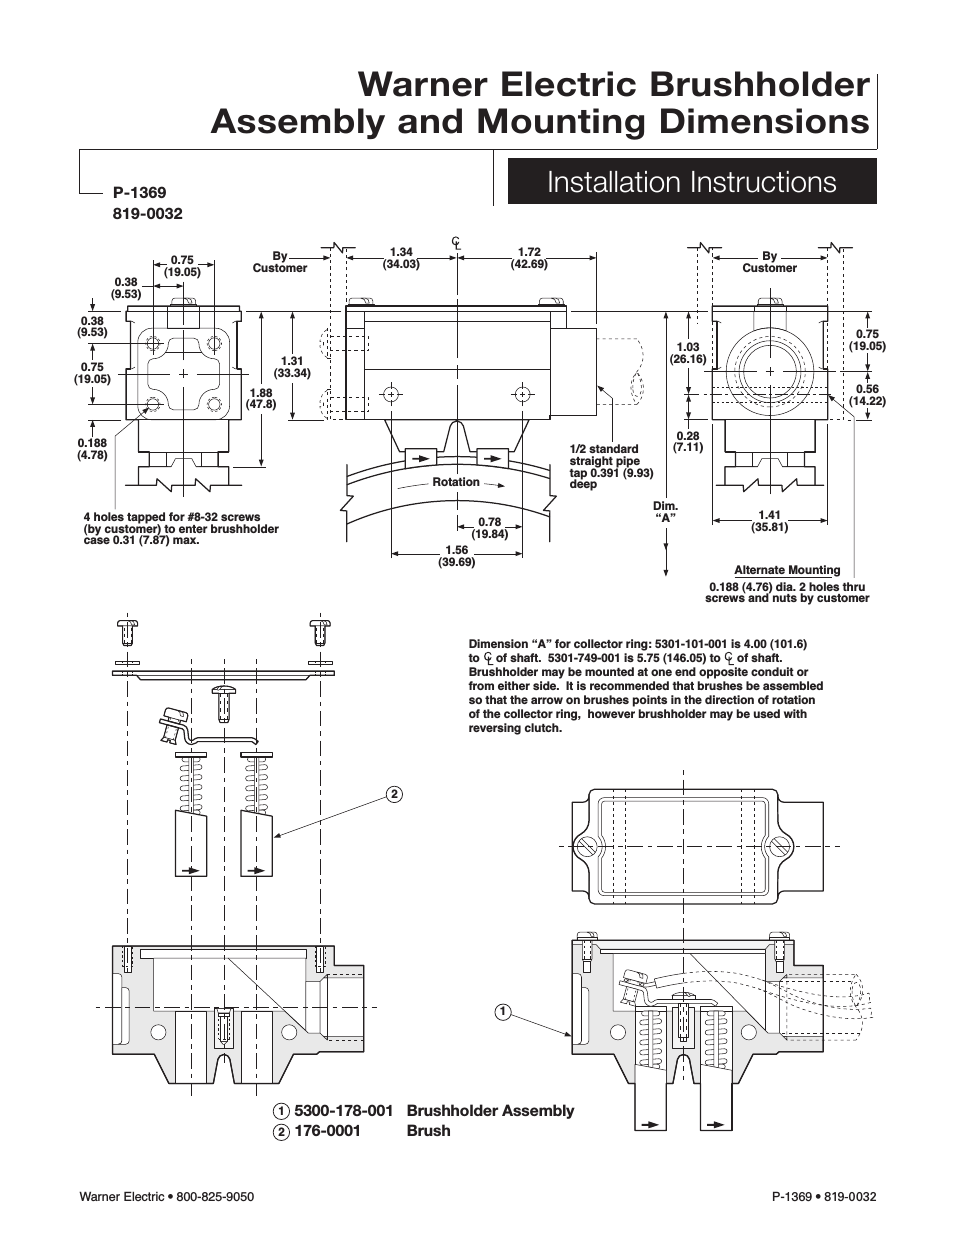 Brushholder Assembly and Mounting Dimensions